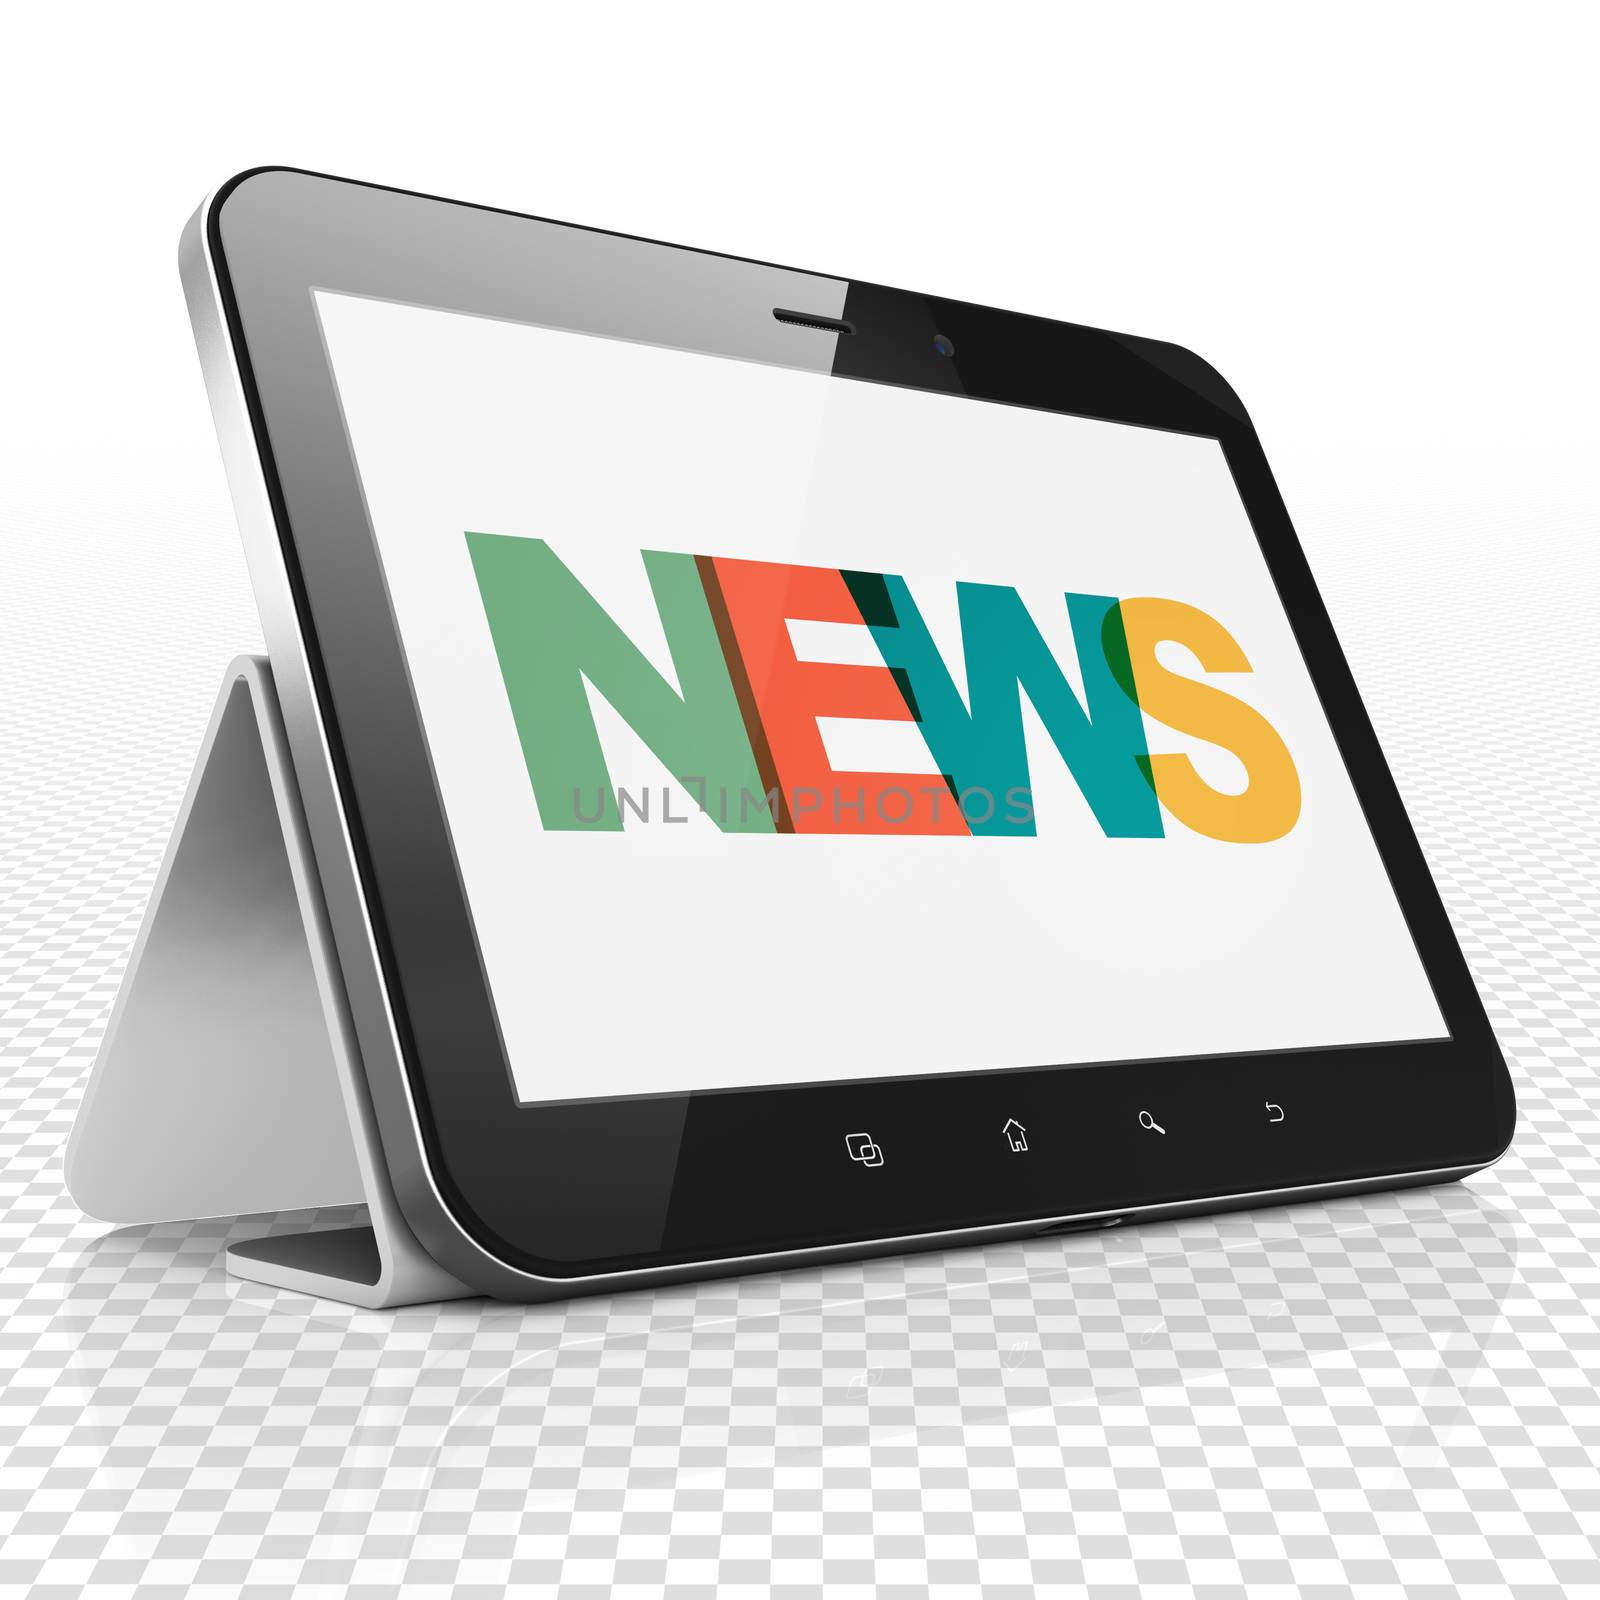 News concept: Tablet Computer with Painted multicolor text News on display, 3D rendering